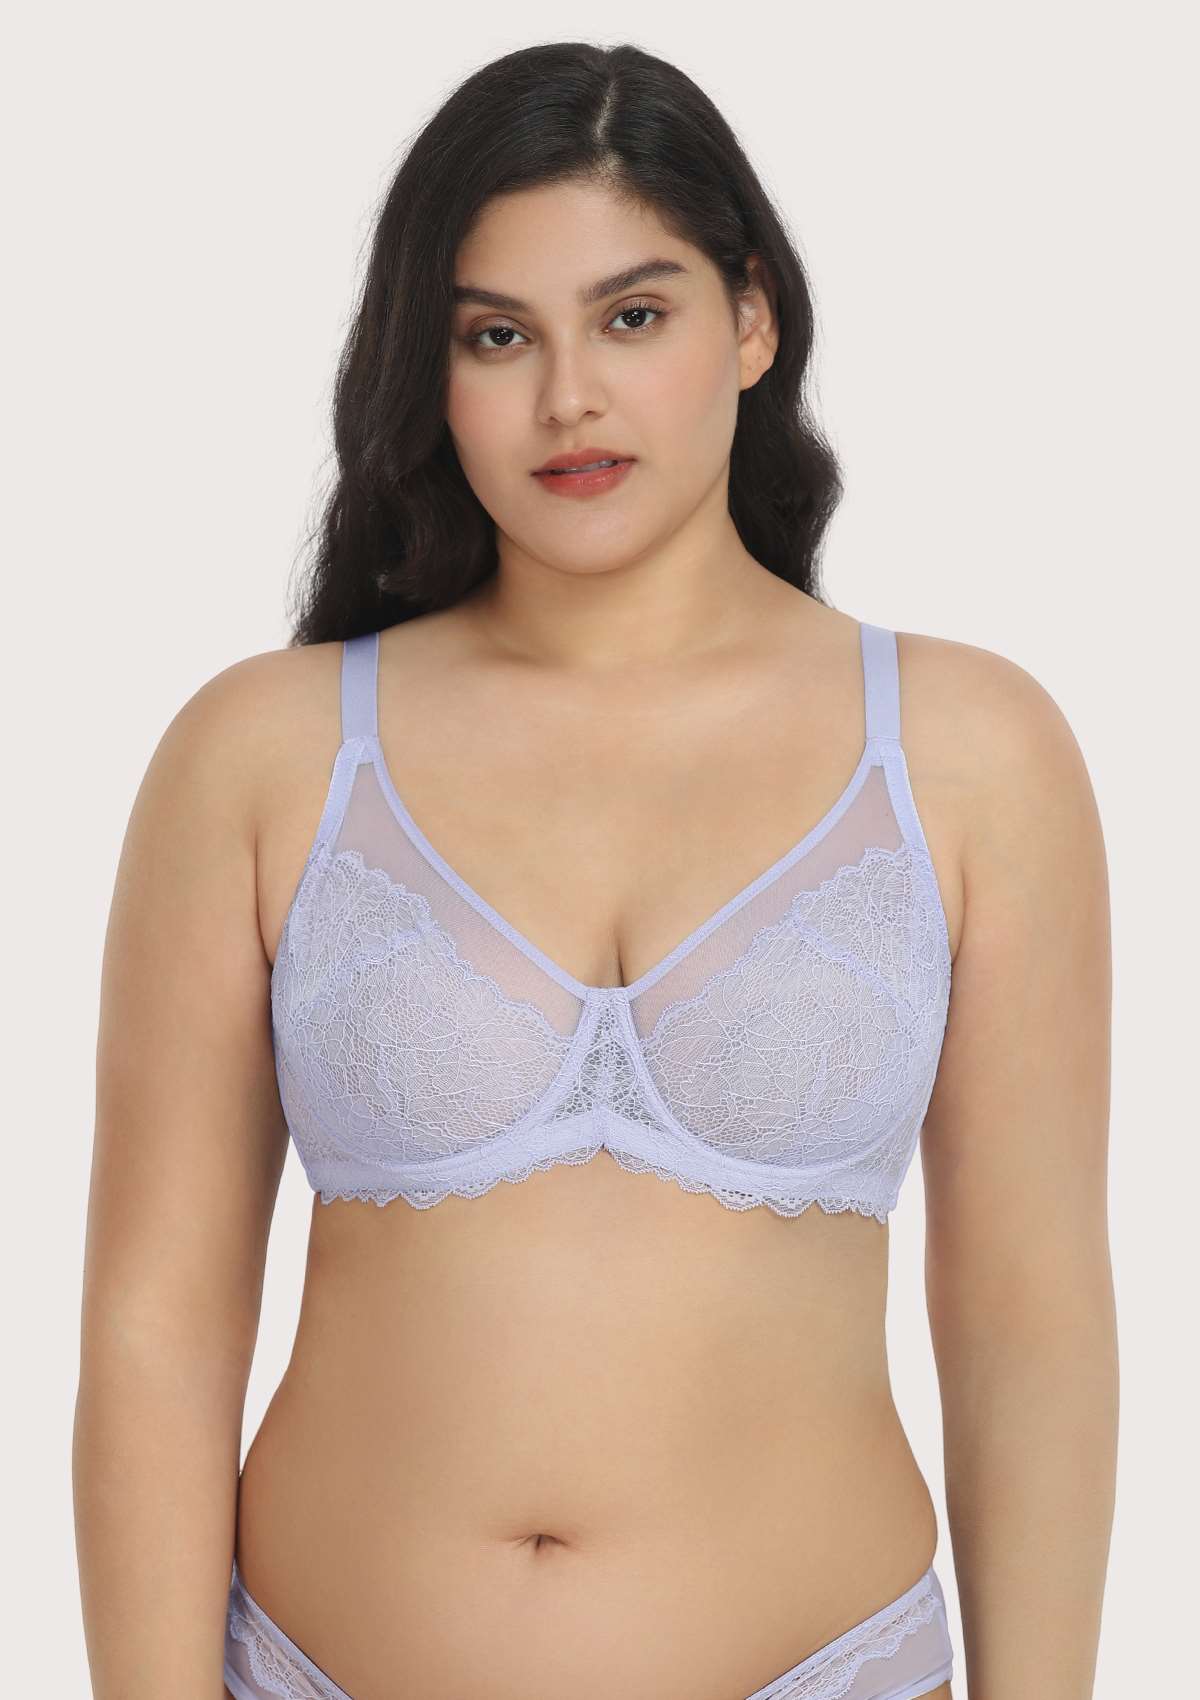 HSIA Wisteria Bra For Lift And Support - Full Coverage Minimizer Bra - Light Pink / 34 / D